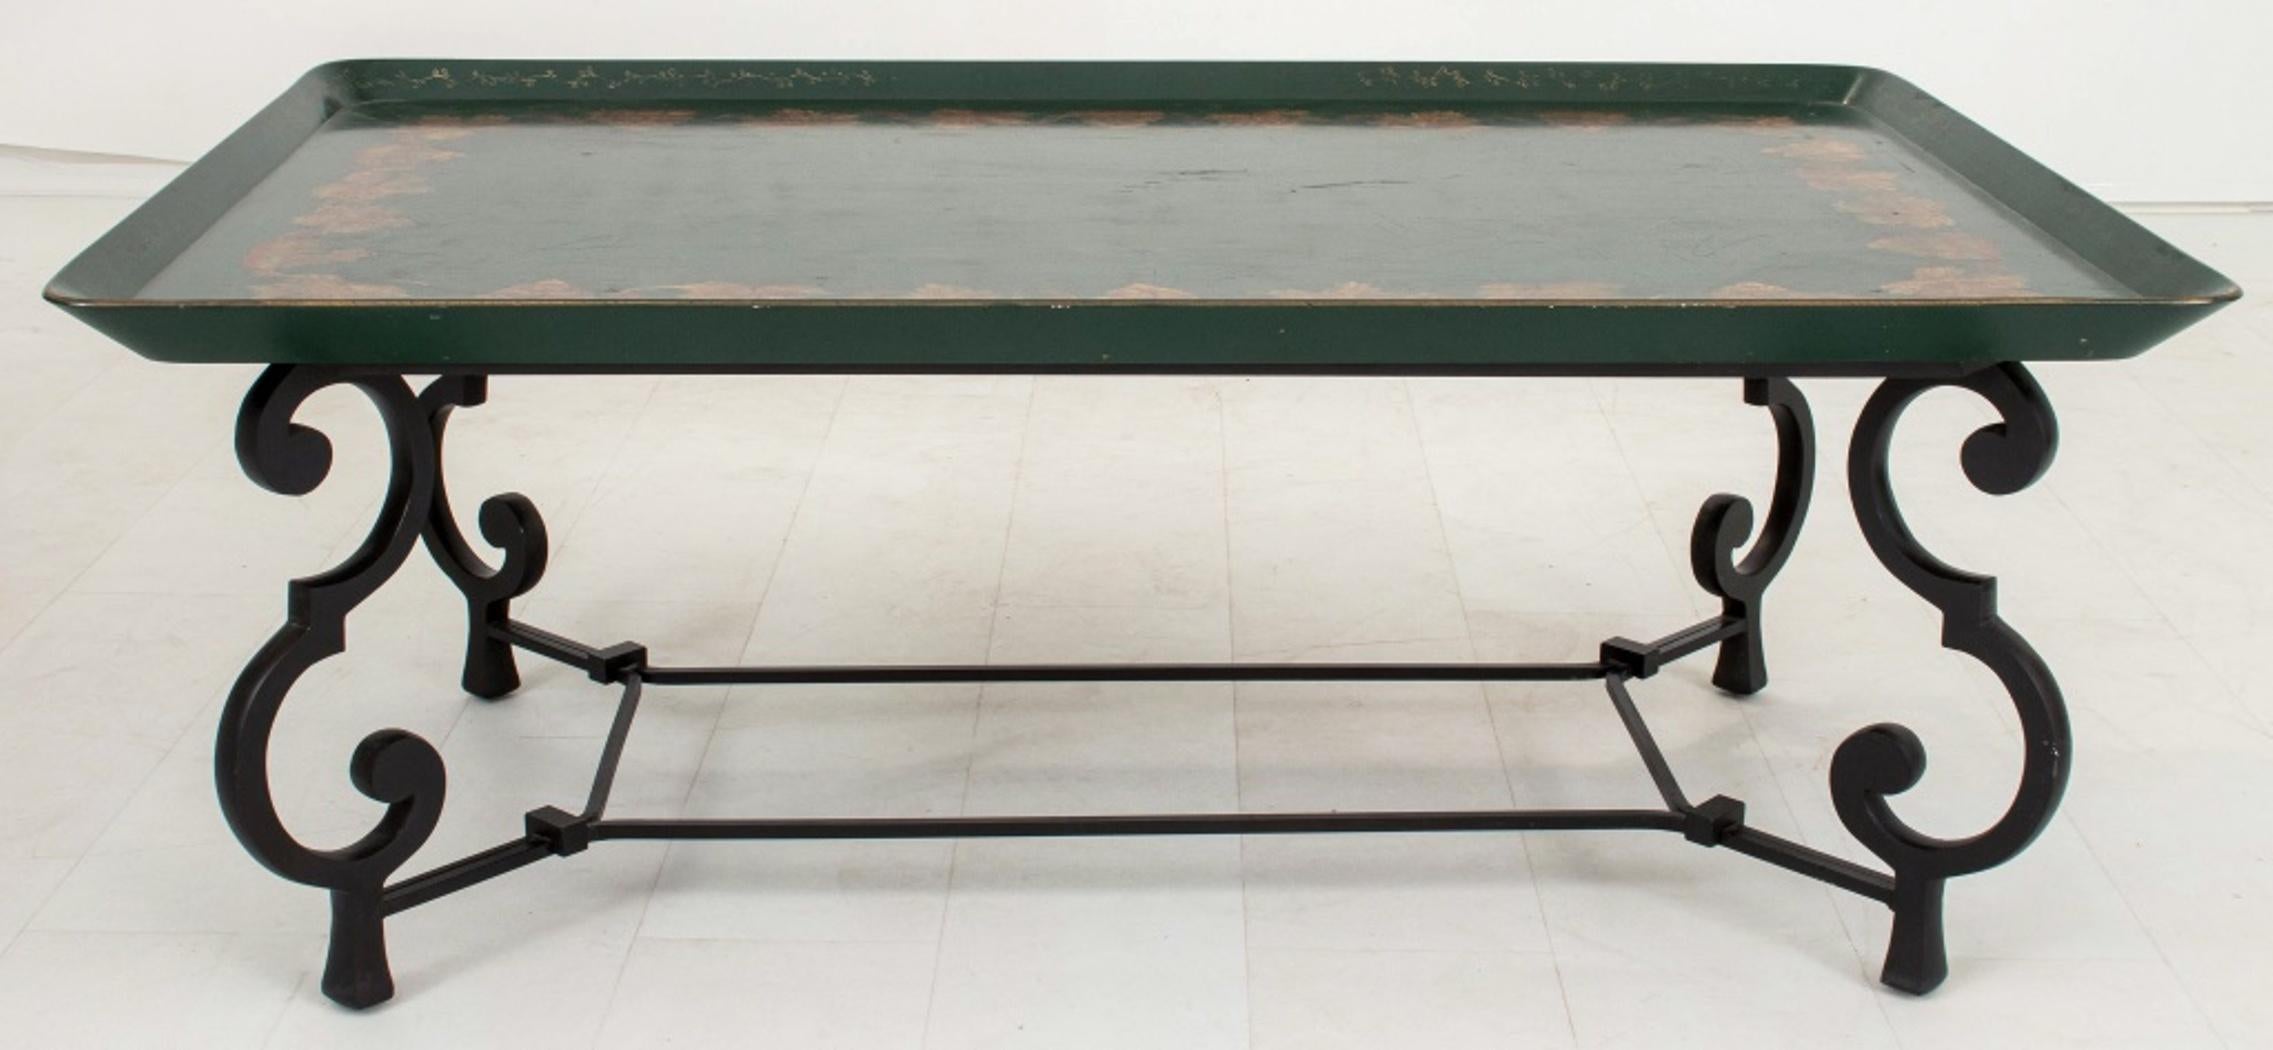 20th Century Maison Ramsay Manner Wrought Iron Tray Table